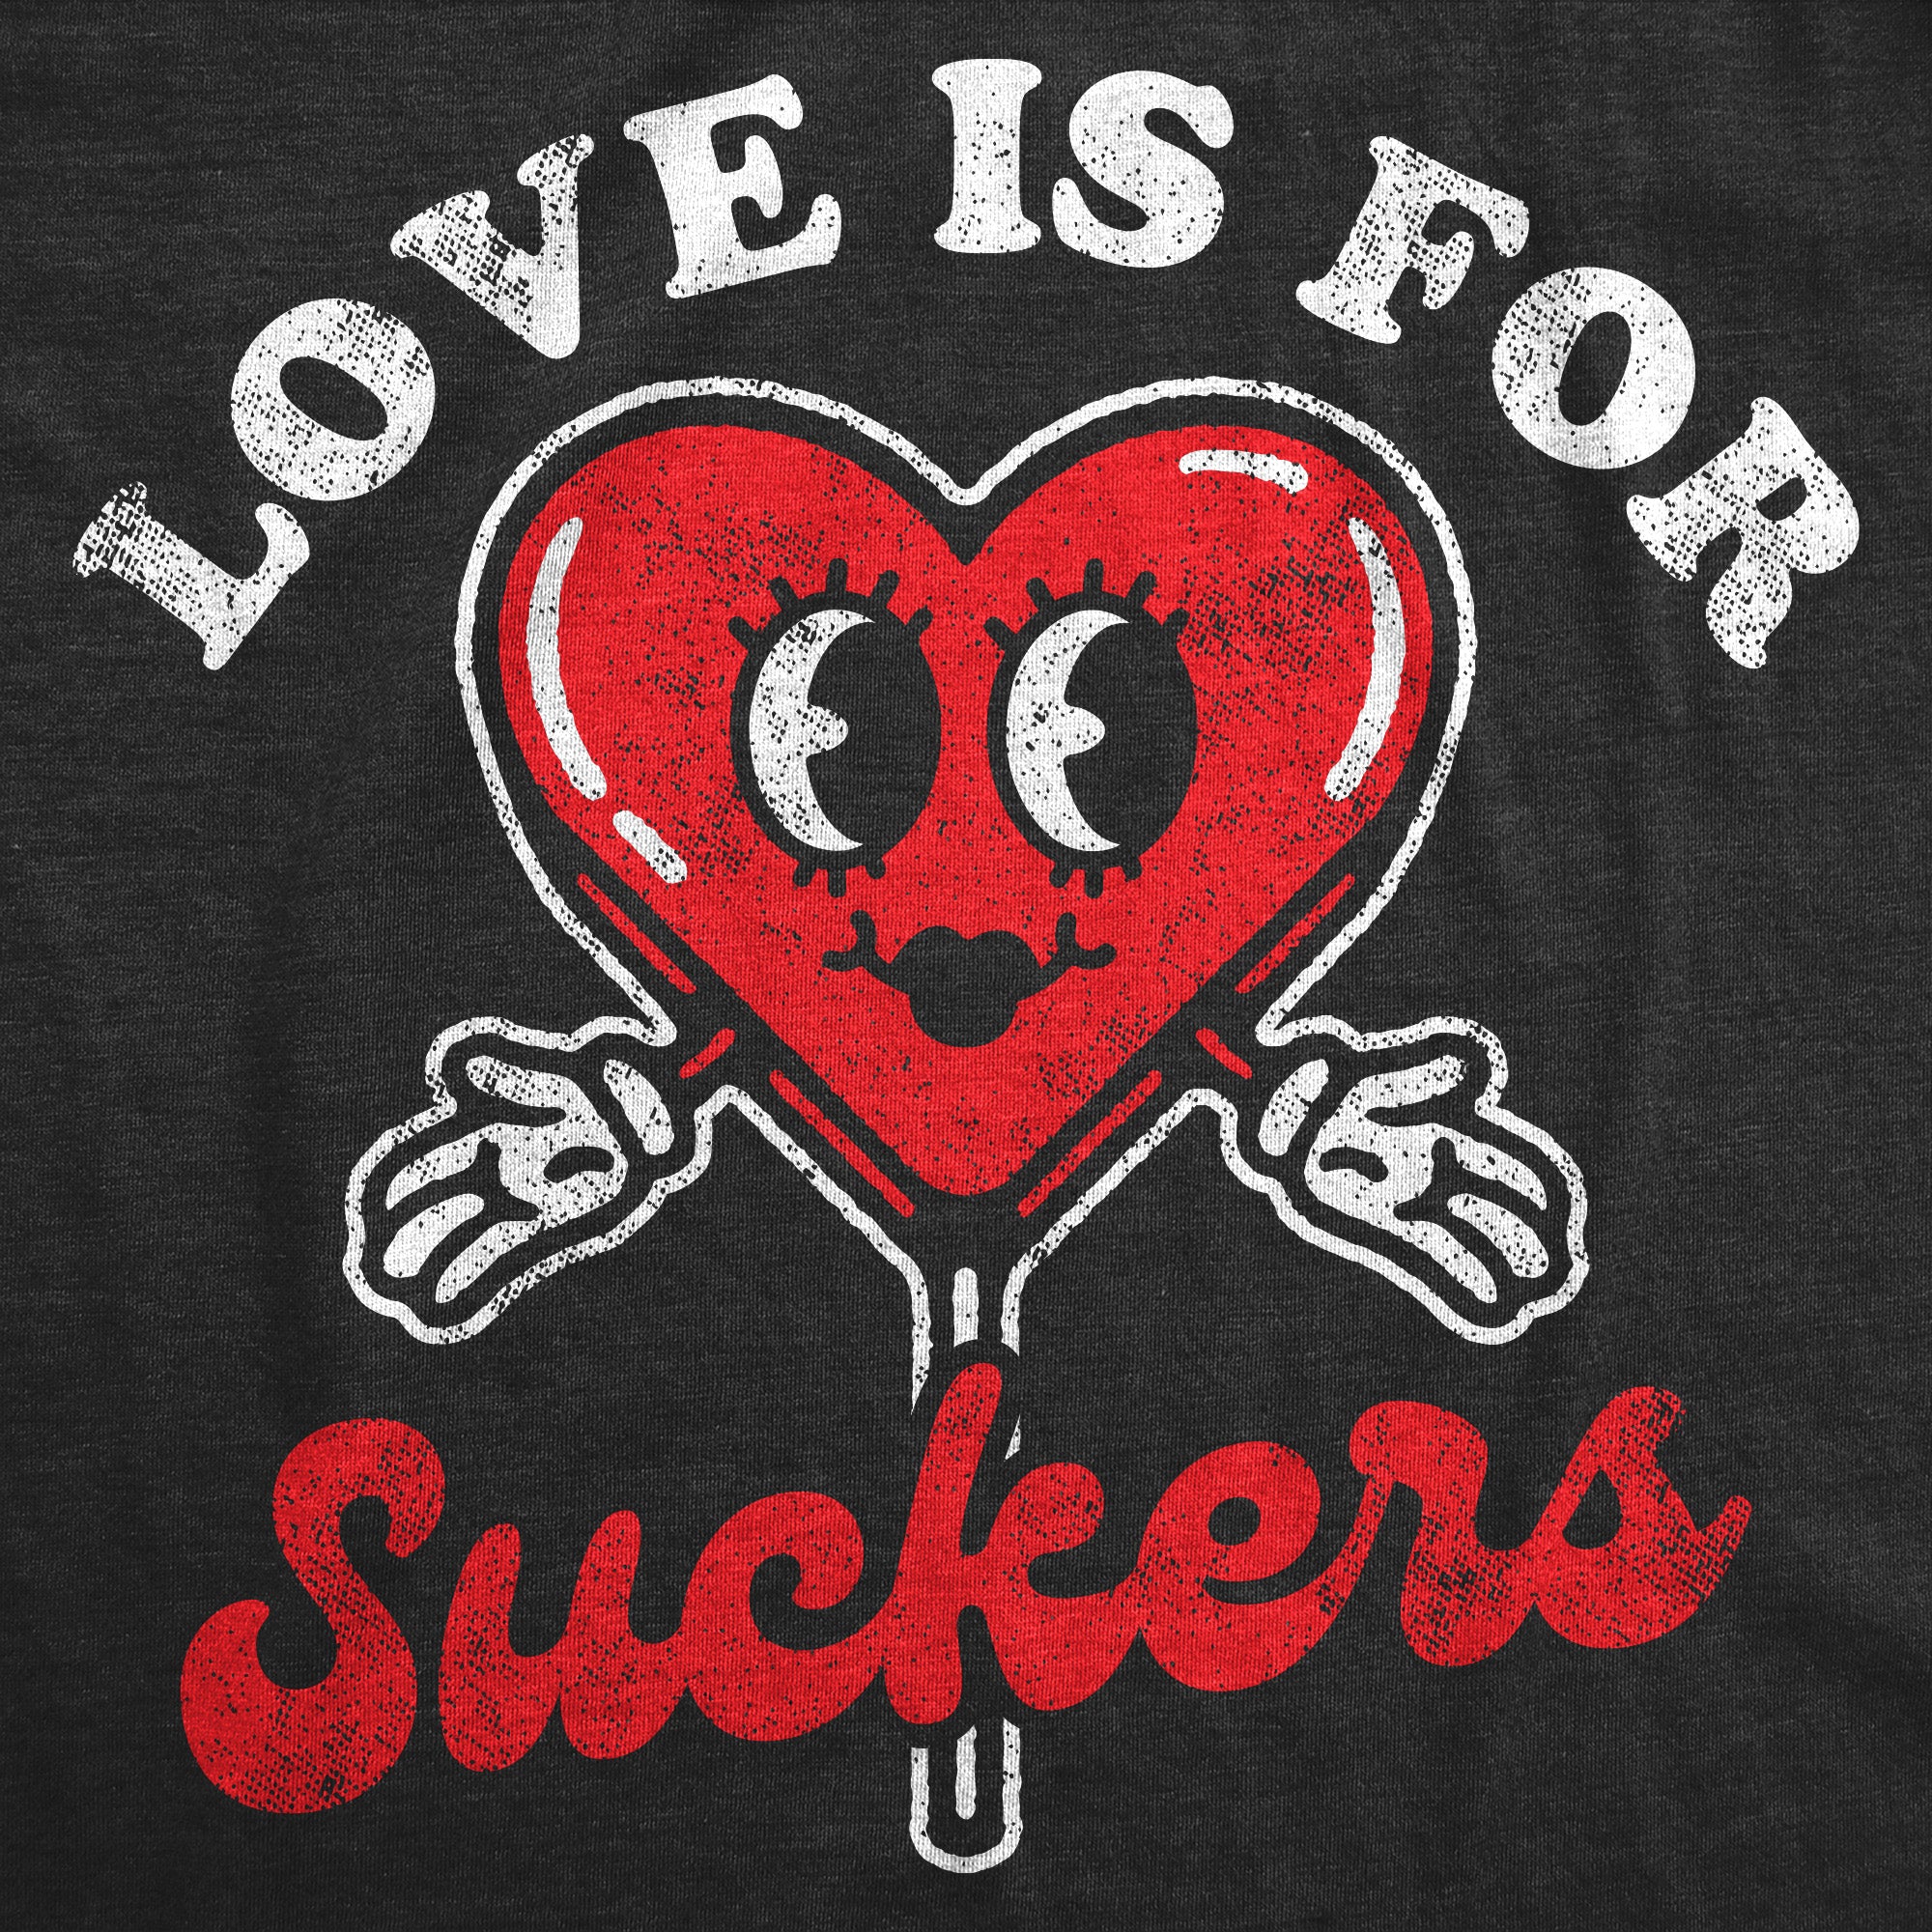 Funny Heather Black - Love Is For Suckers Love Is For Suckers Womens T Shirt Nerdy Valentine's Day Sarcastic Tee